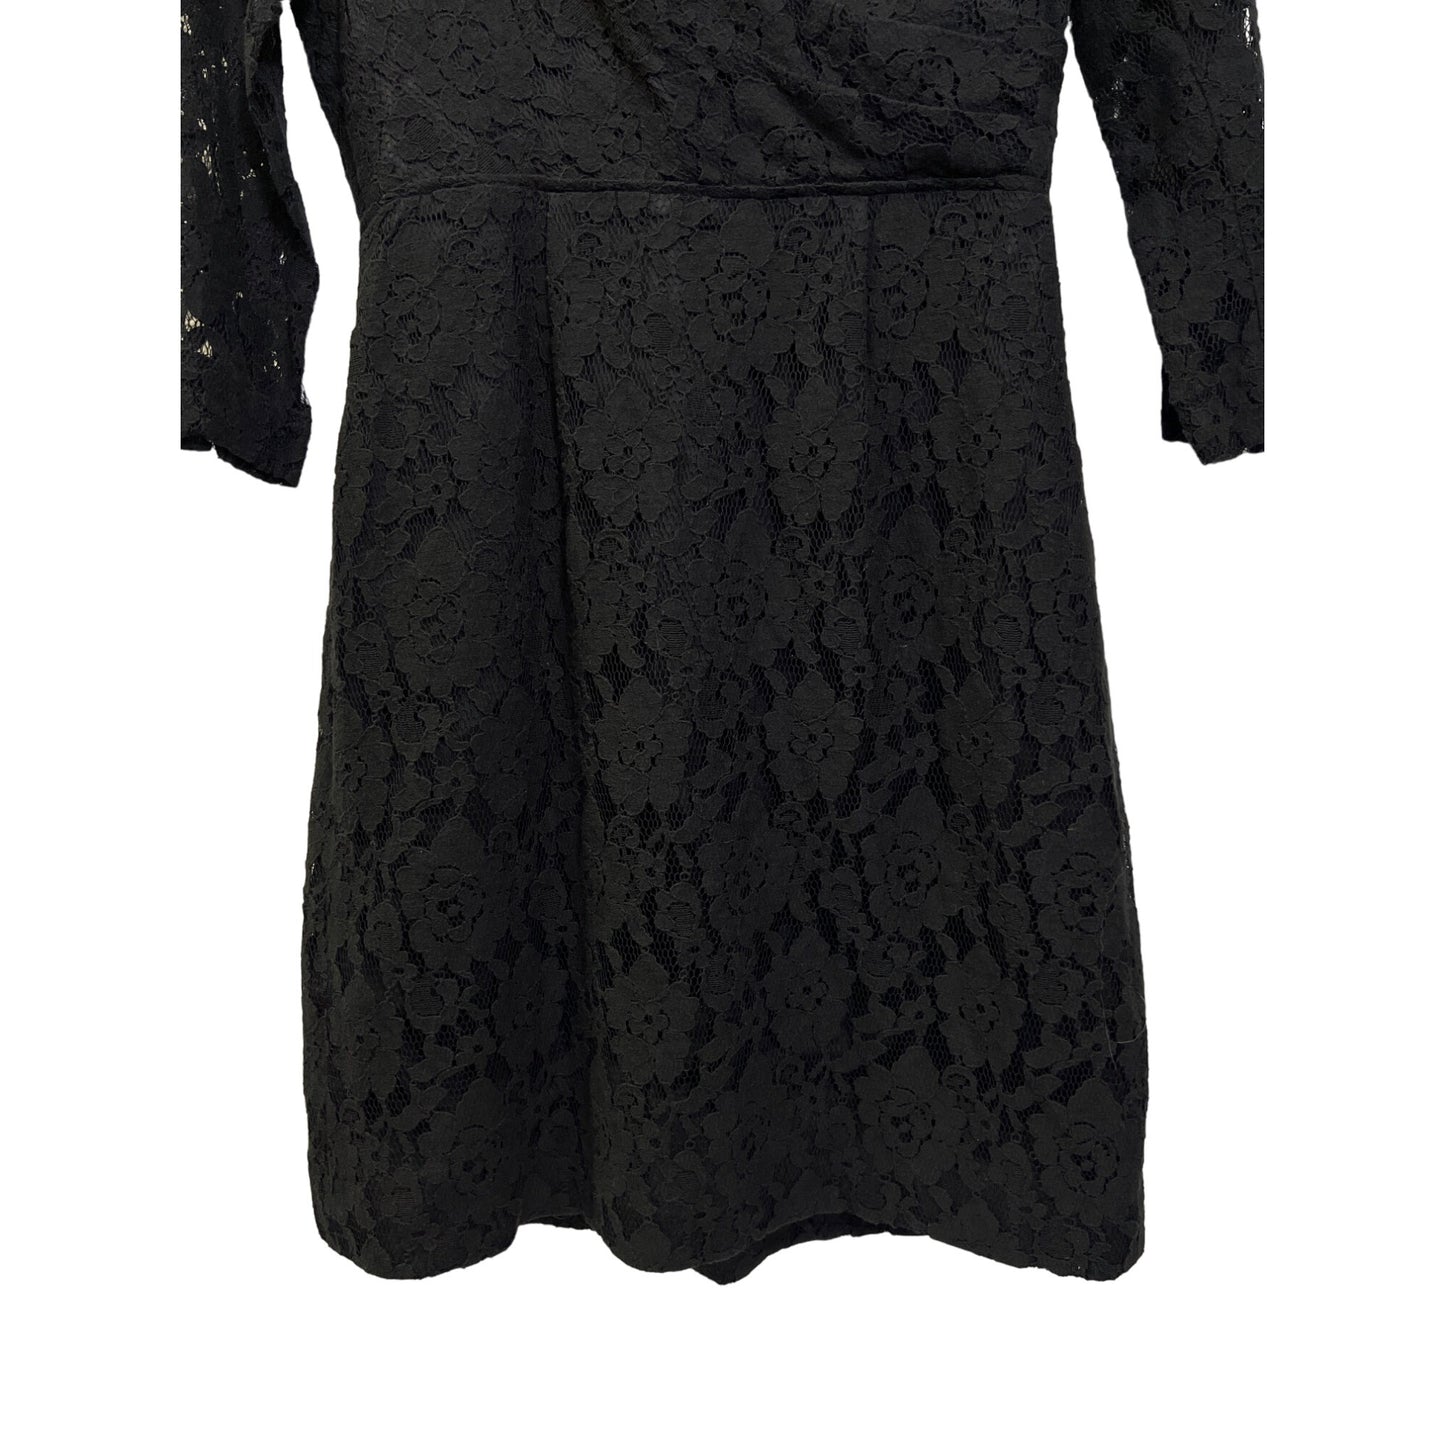 J. Crew Factory Black Lace Overlay Cocktail Dress